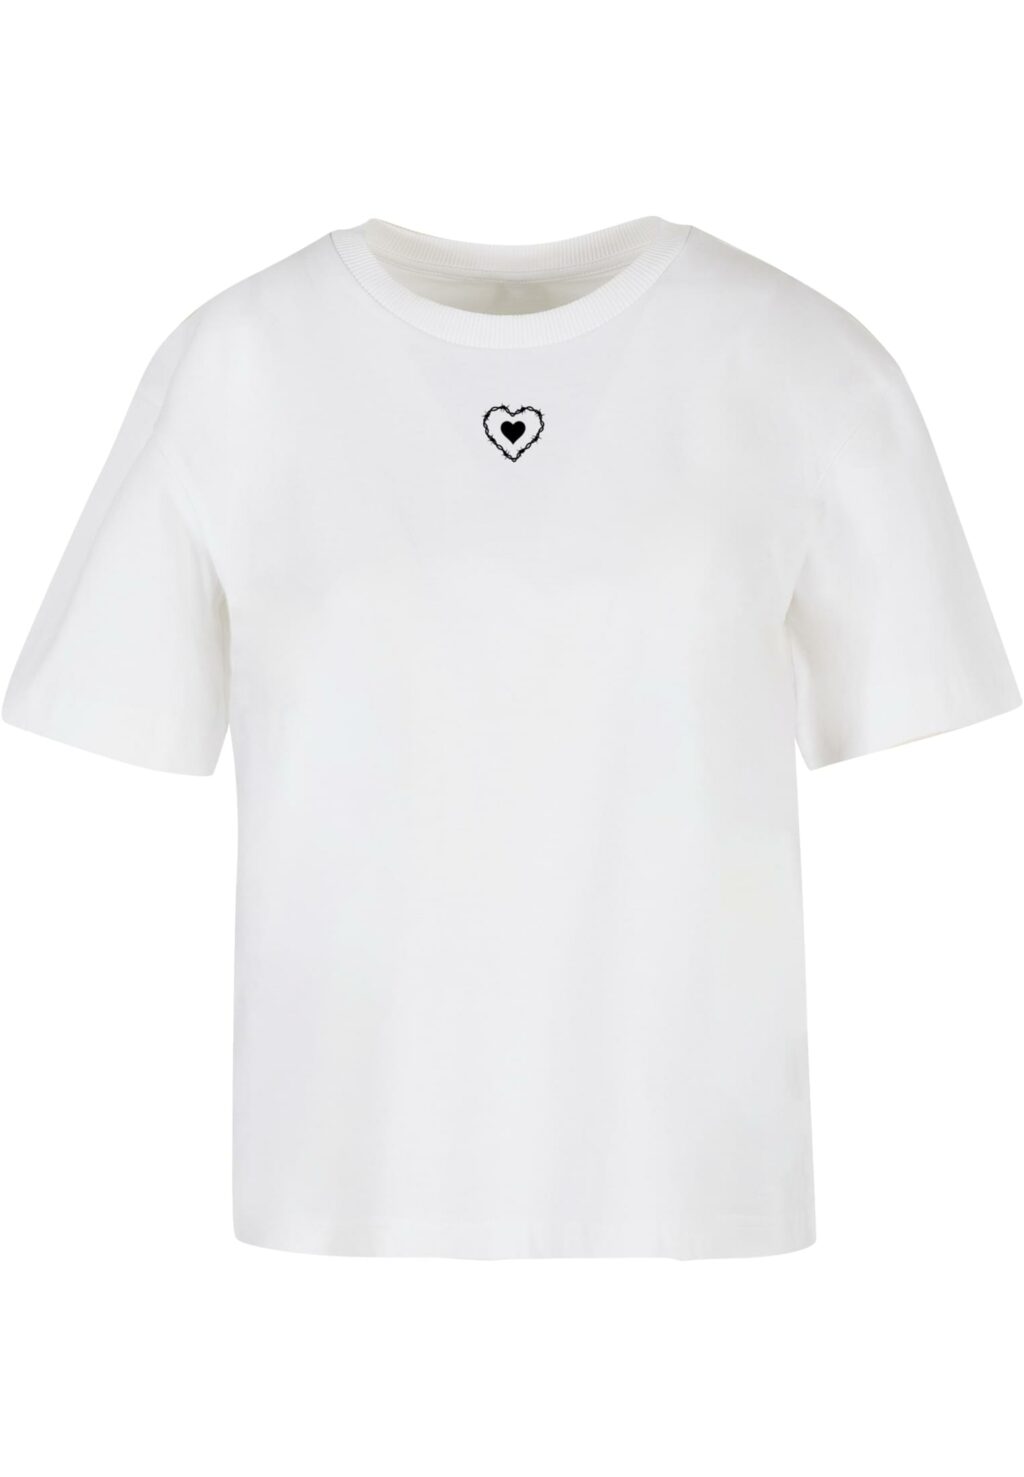 Good Vibes Only Heart Tee white MST094